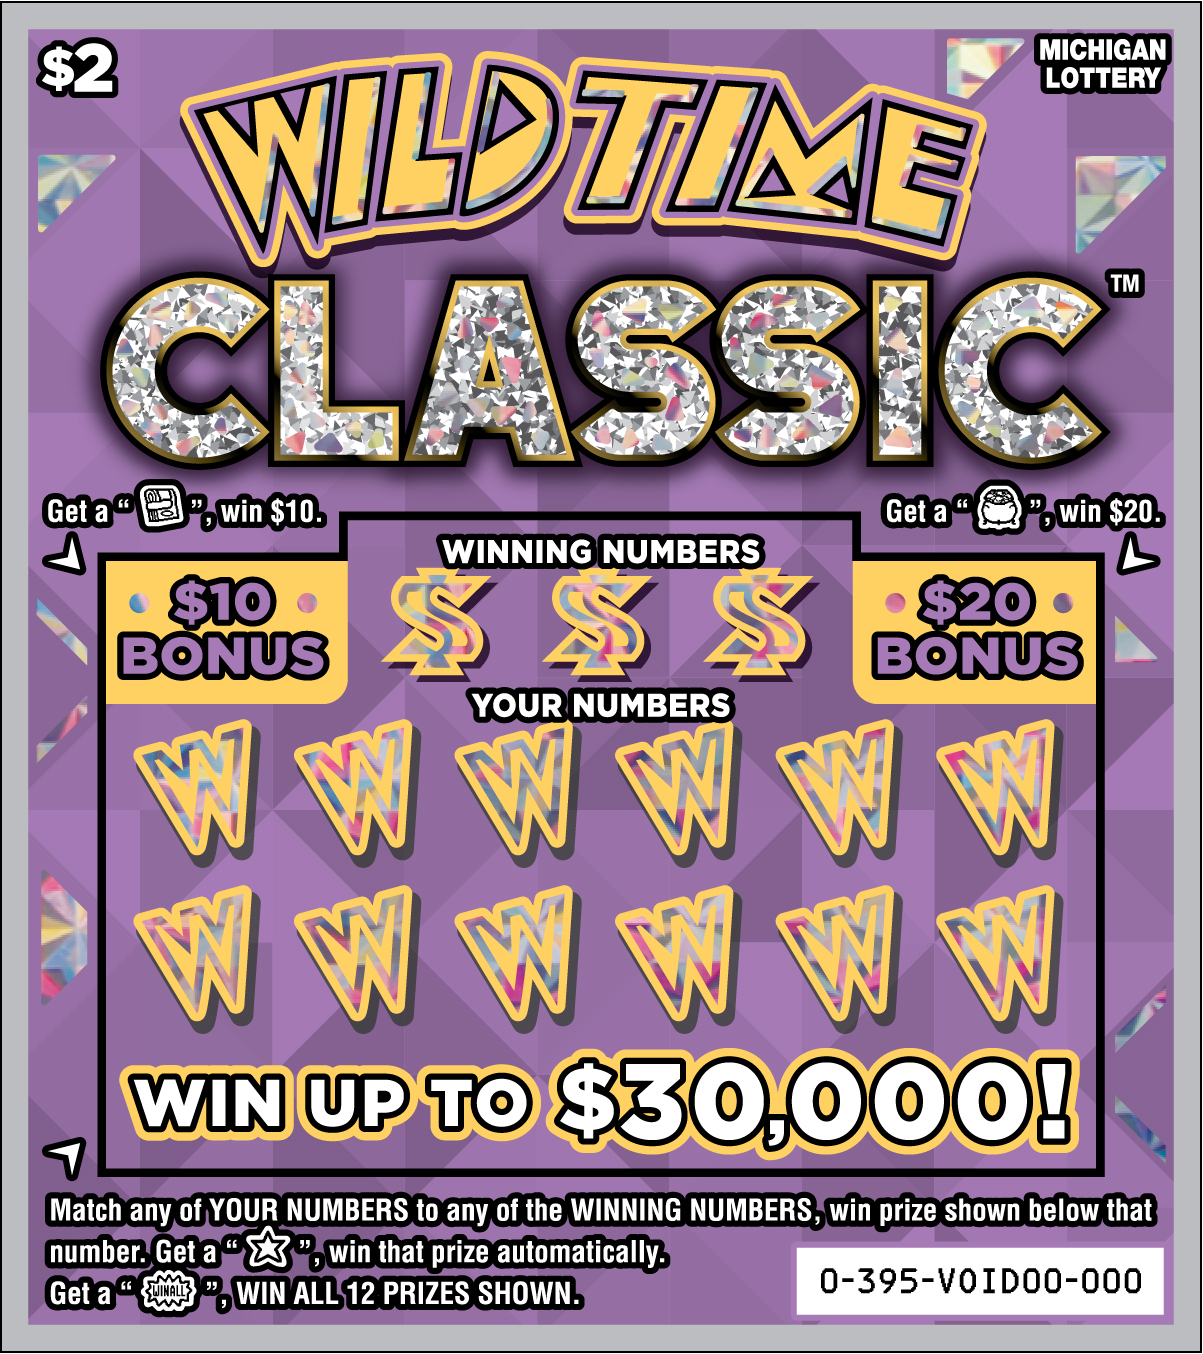 Wild Time Classic Lottery results